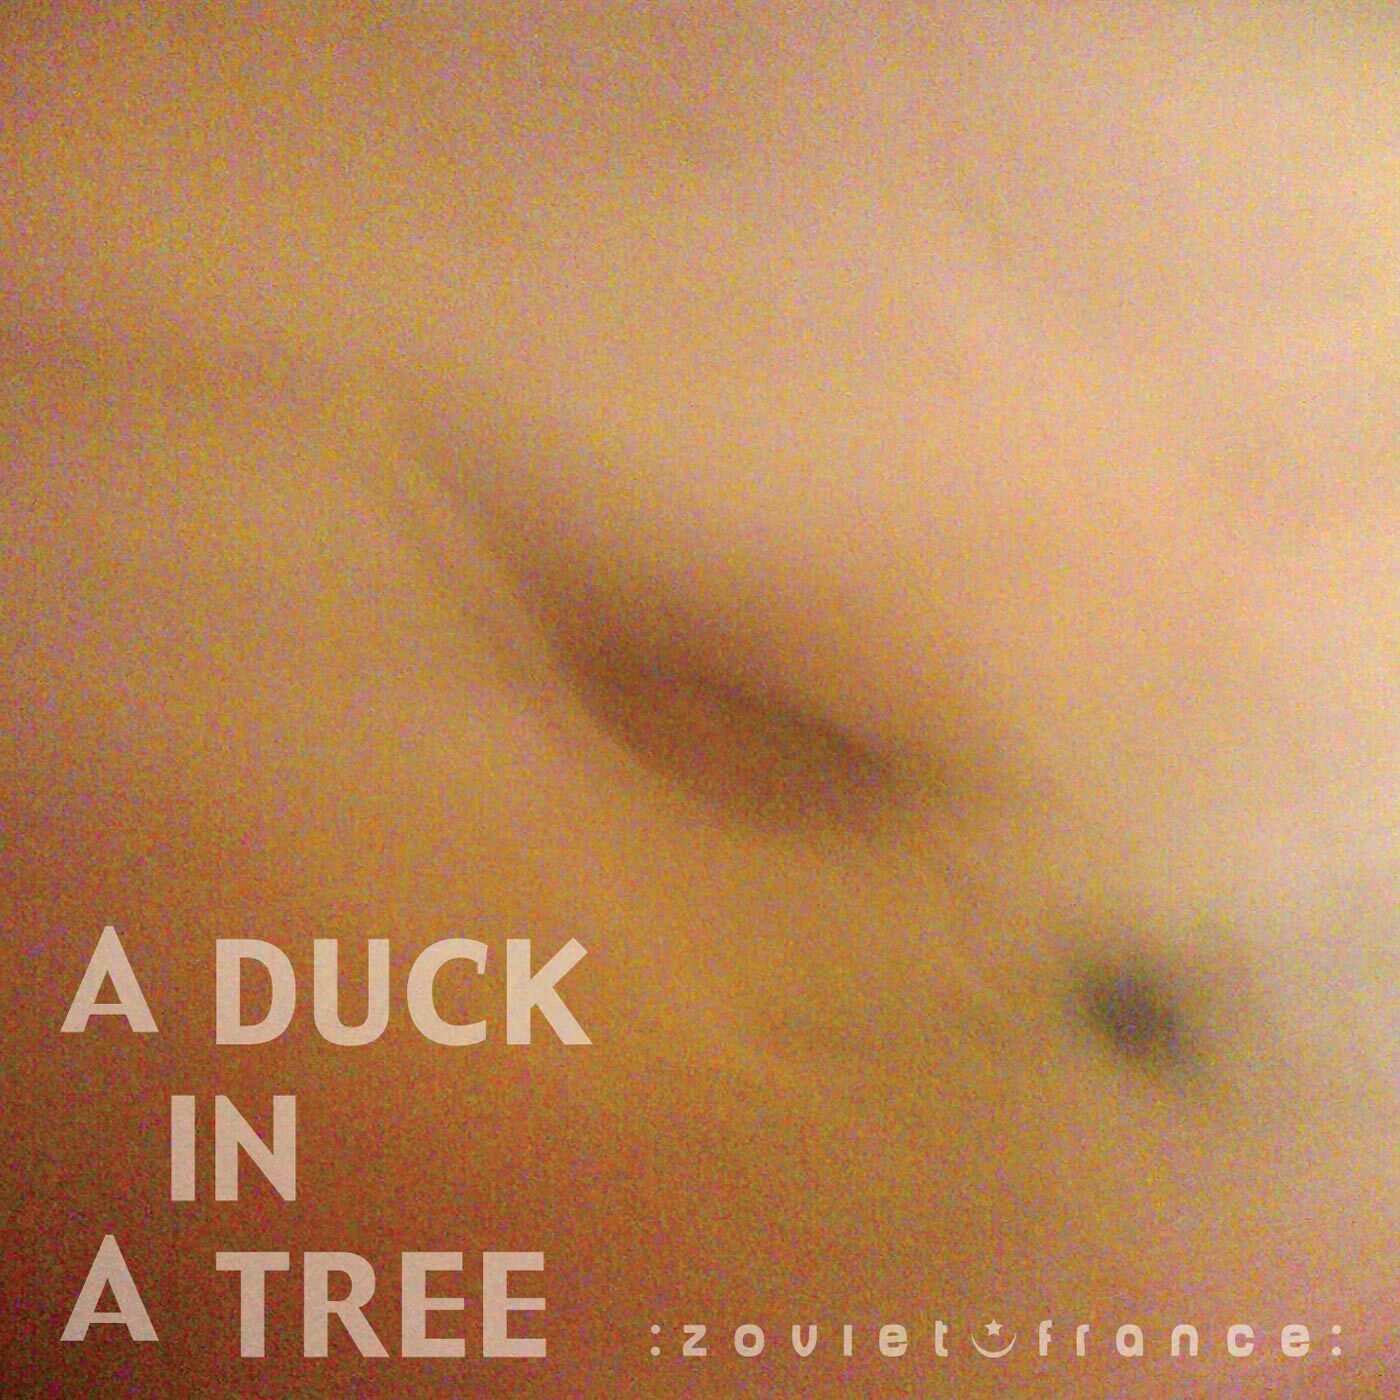 A-Duck-in-a-Tree-2013-03-30-_-This-Firmament-to-Which-We-Owe-Our-Lives-1400.jpg